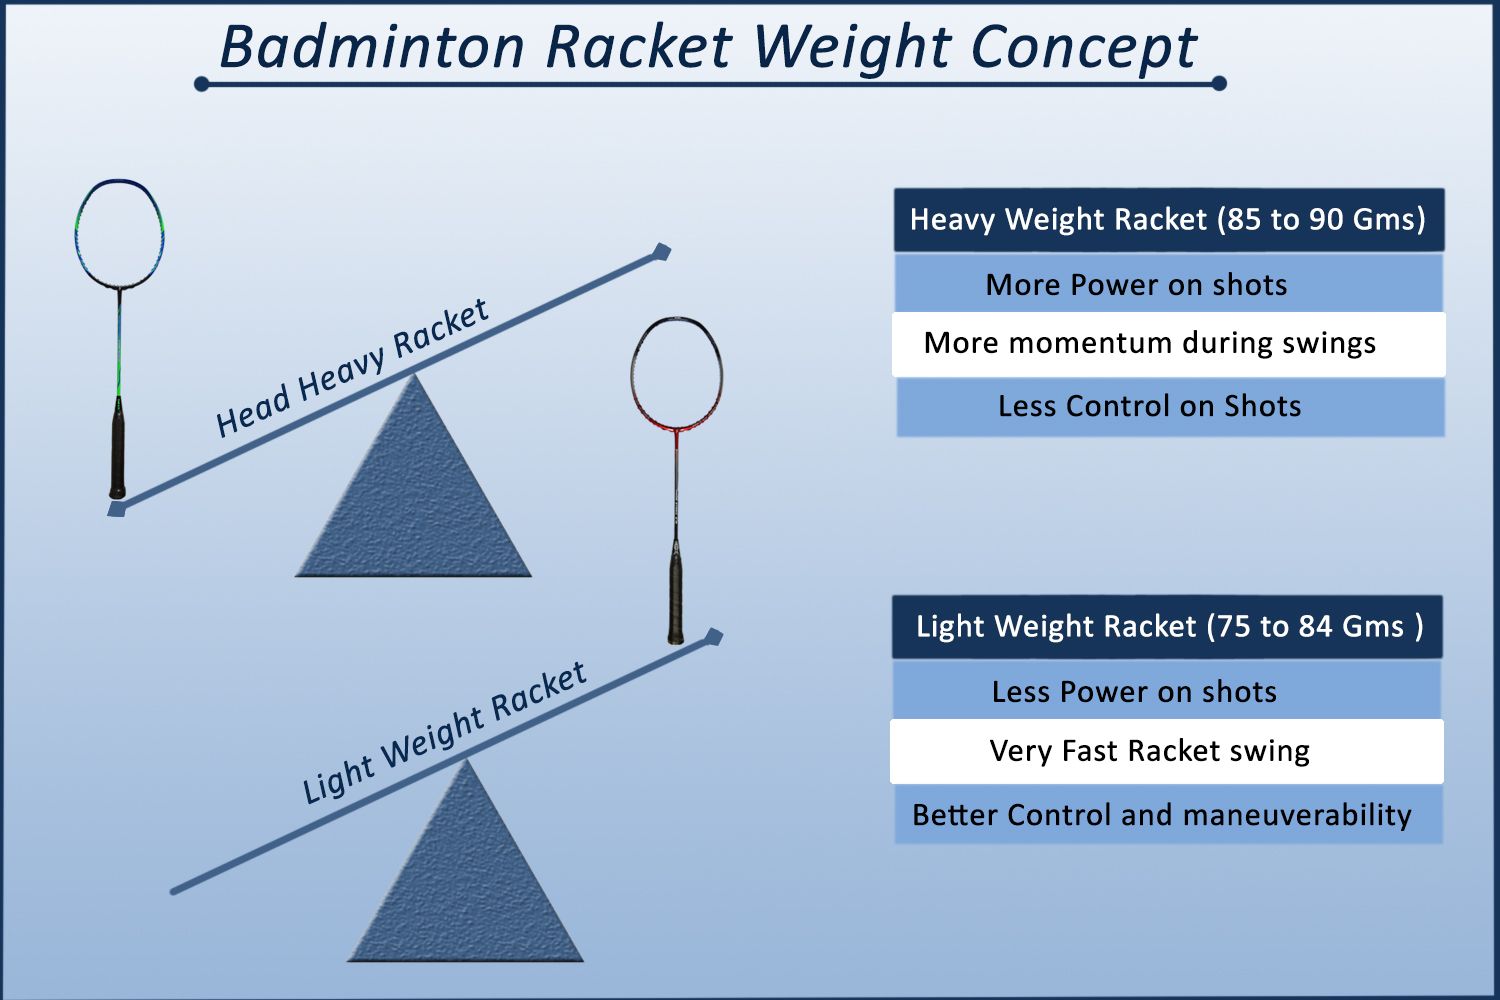 Concept of Badminton Racket Weight, Balance and Power Complete Guide